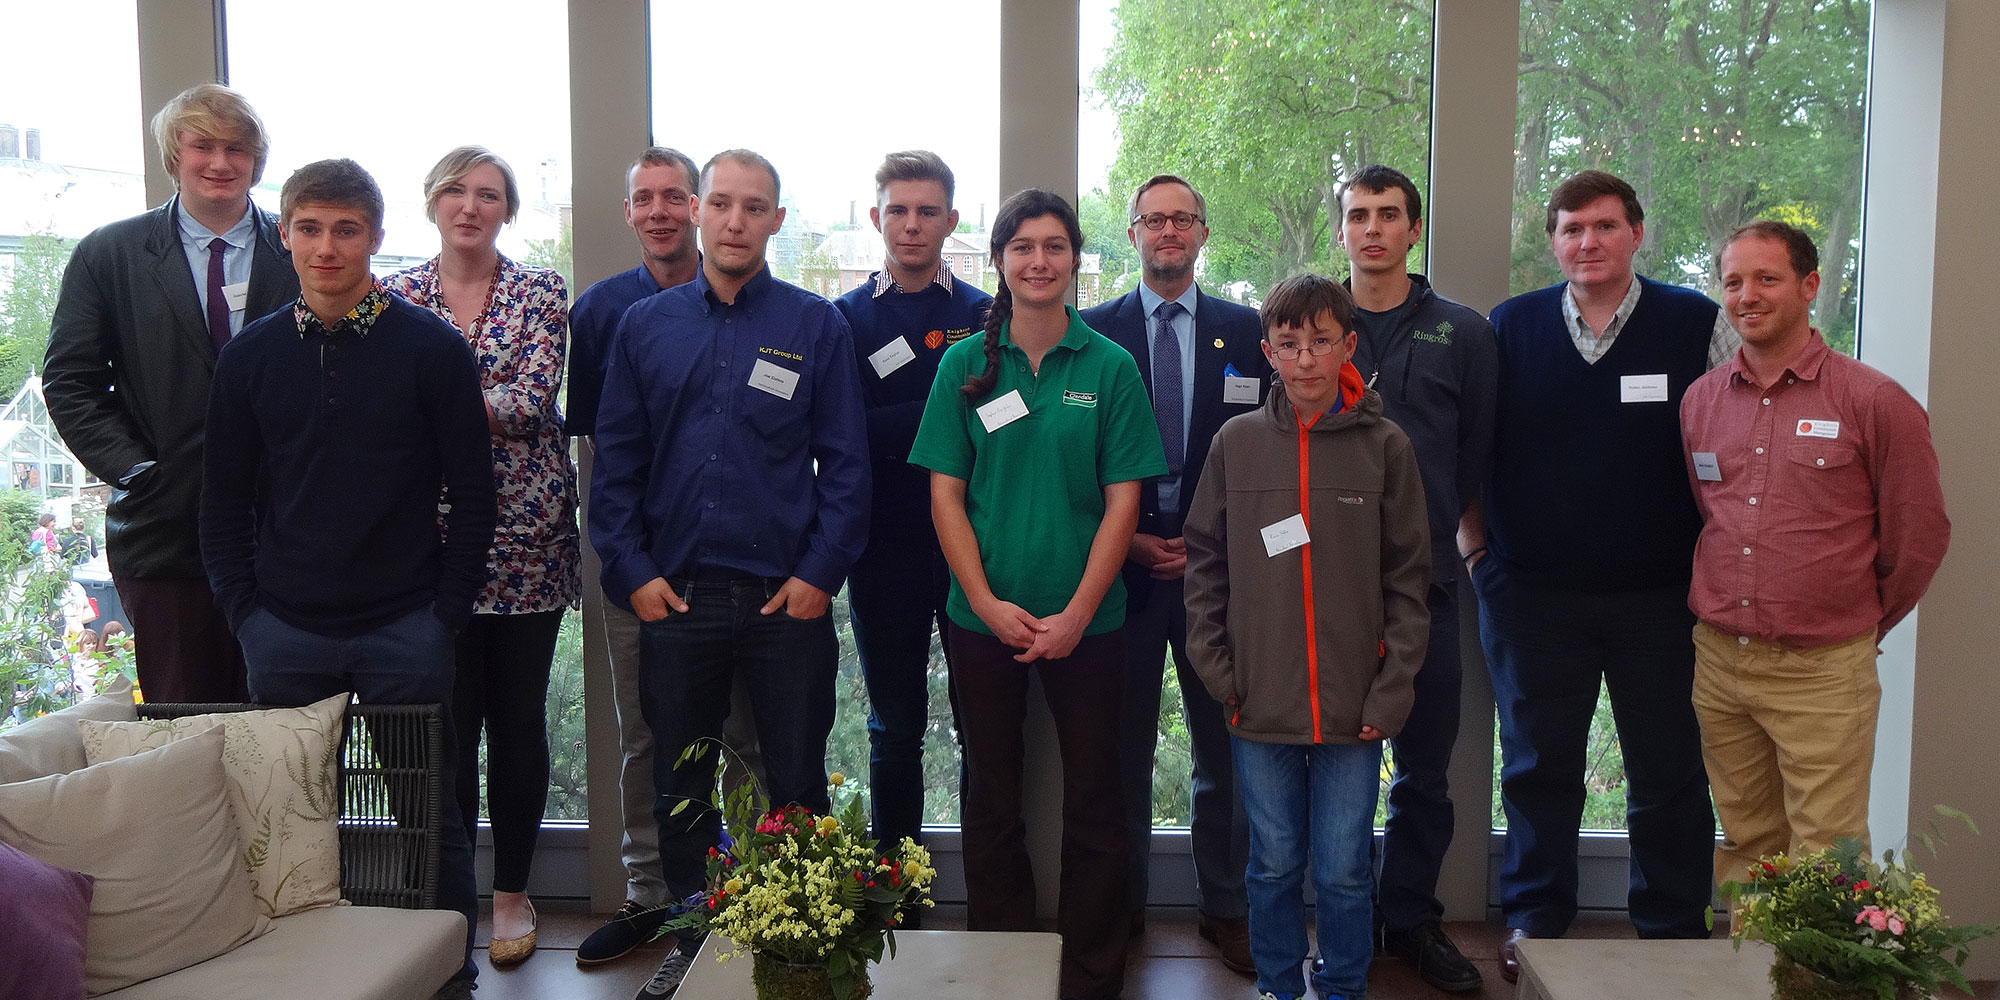 Young arborists recognised at Chelsea Flower Show 2016